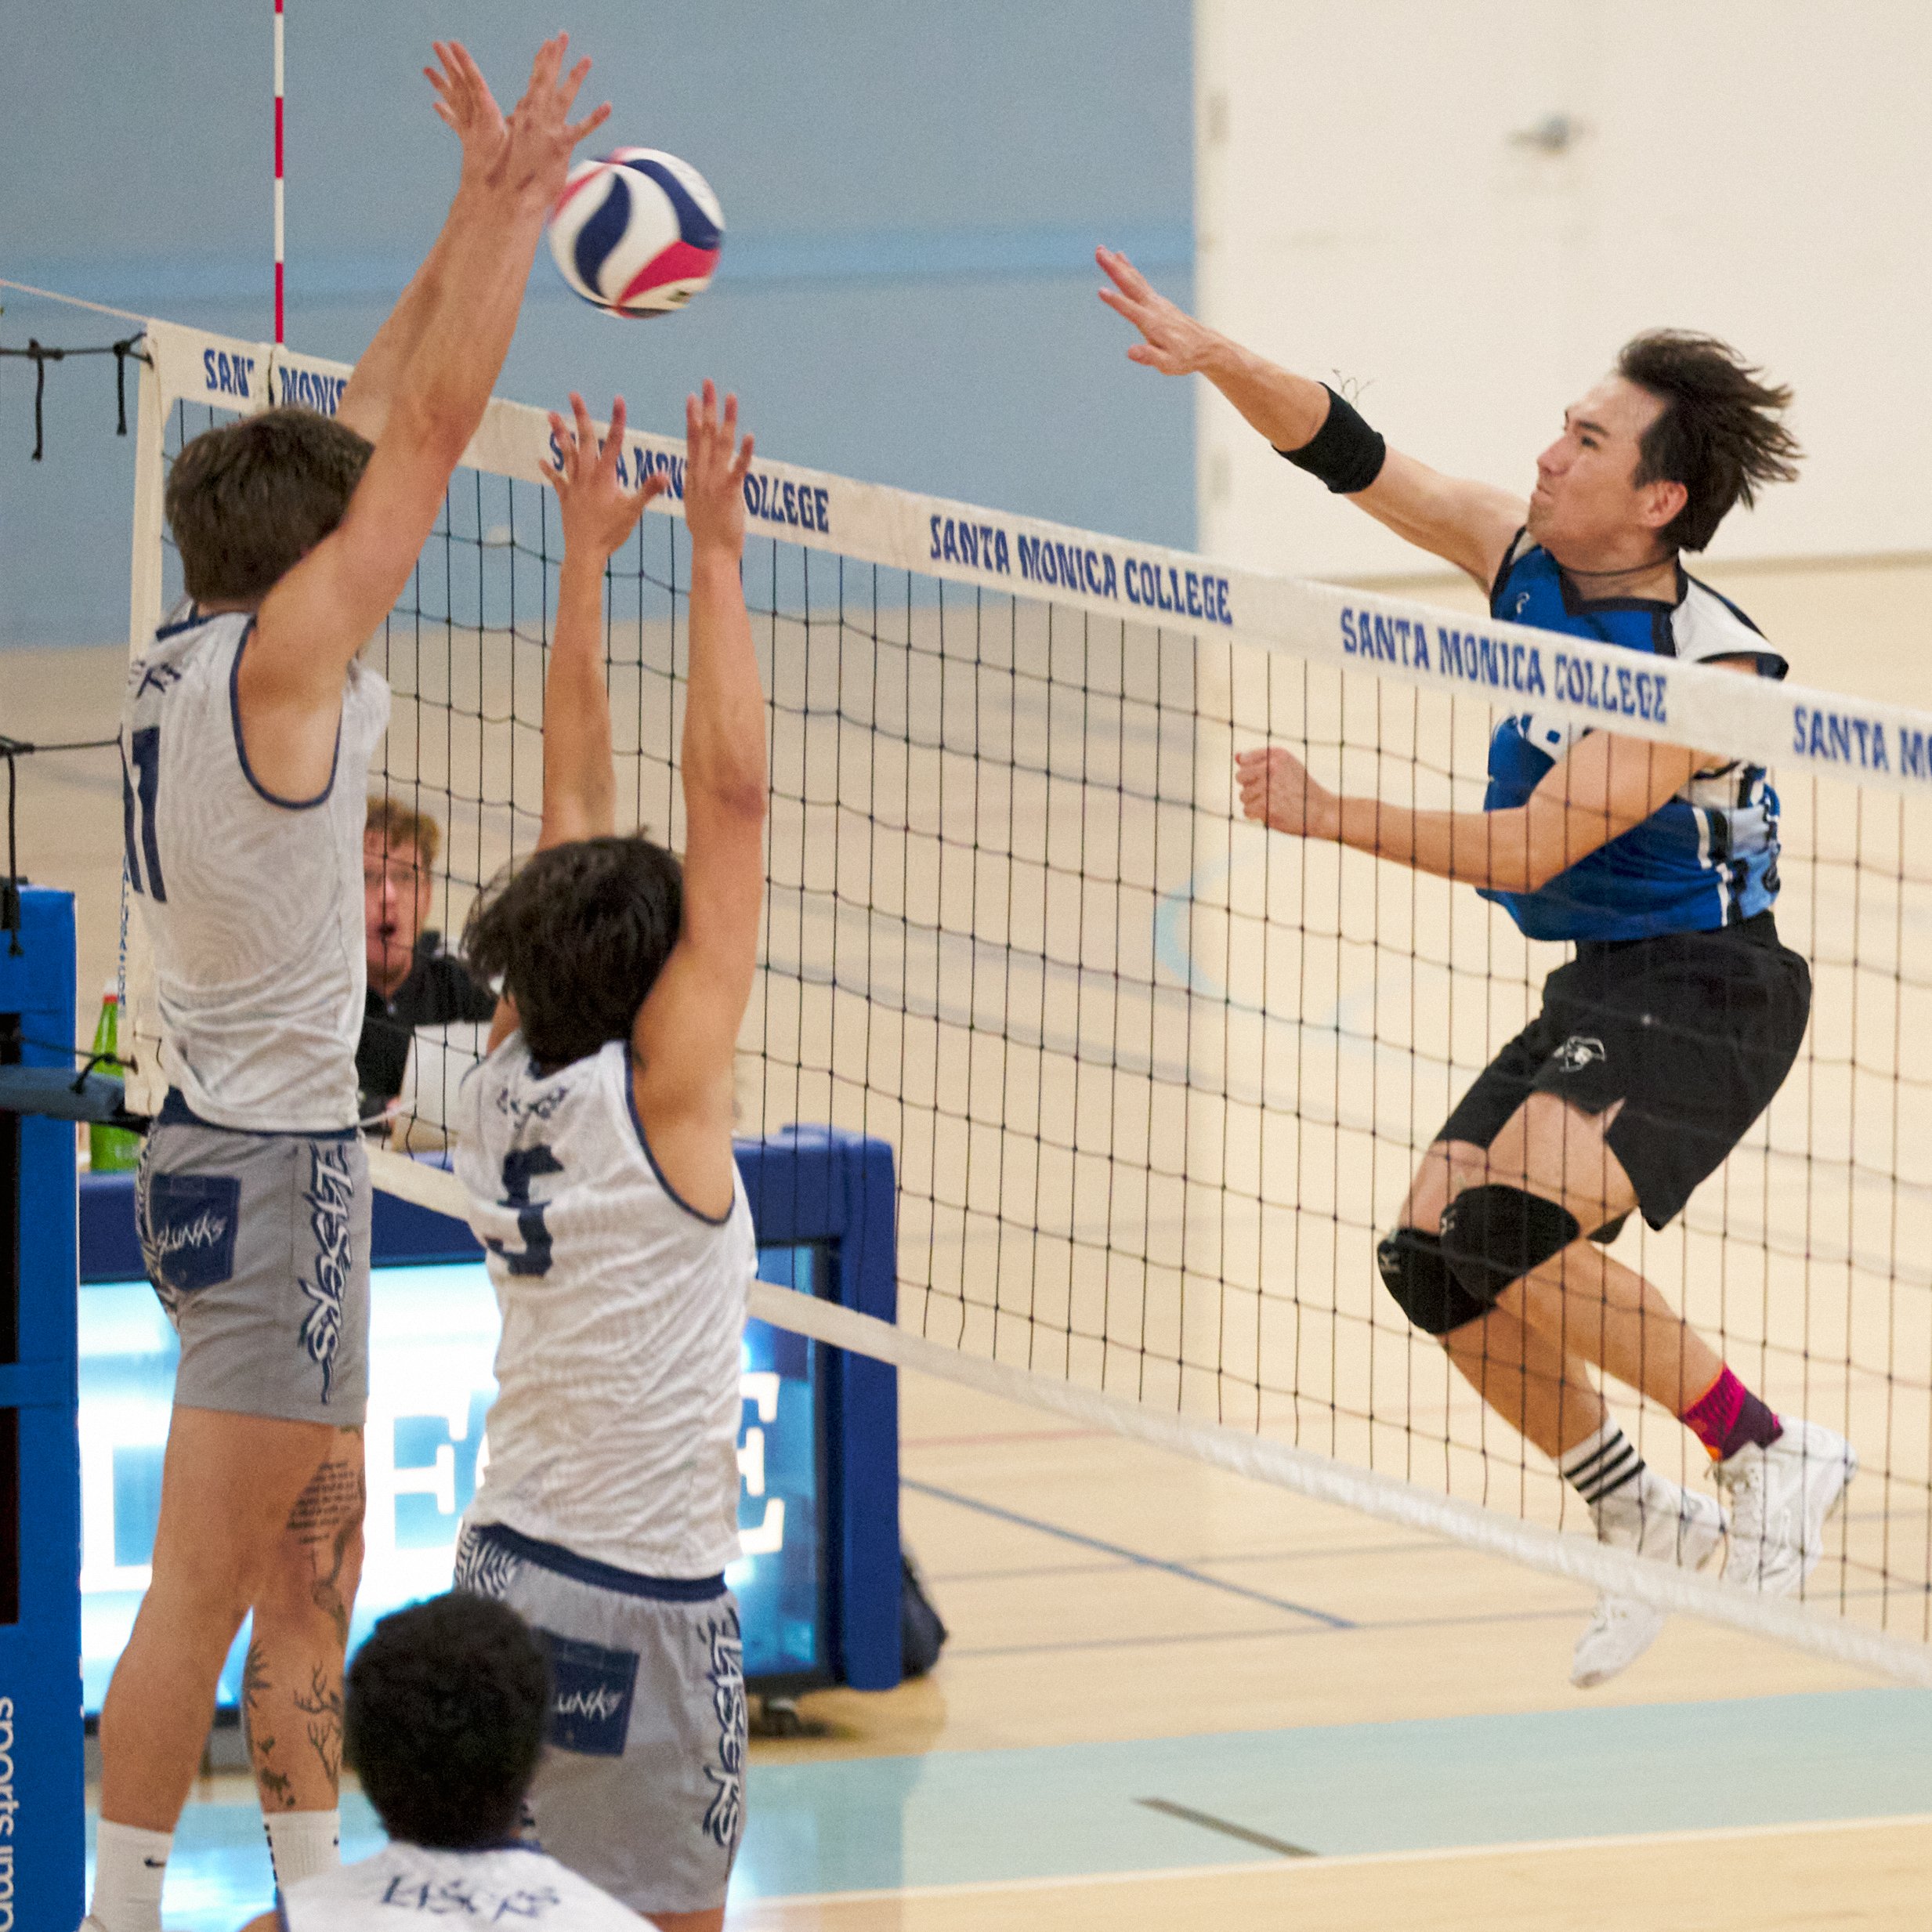  Santa Monica College Corsairs' Enkhtur Tserendavaa (right) sends the ball past Irvine Valley College Lasers' Zach McEntire (left) and Julio Gutierrez (center) during the men's volleyball match on Friday, Feb. 24, 2023, at Corsair Gym in Santa Monica